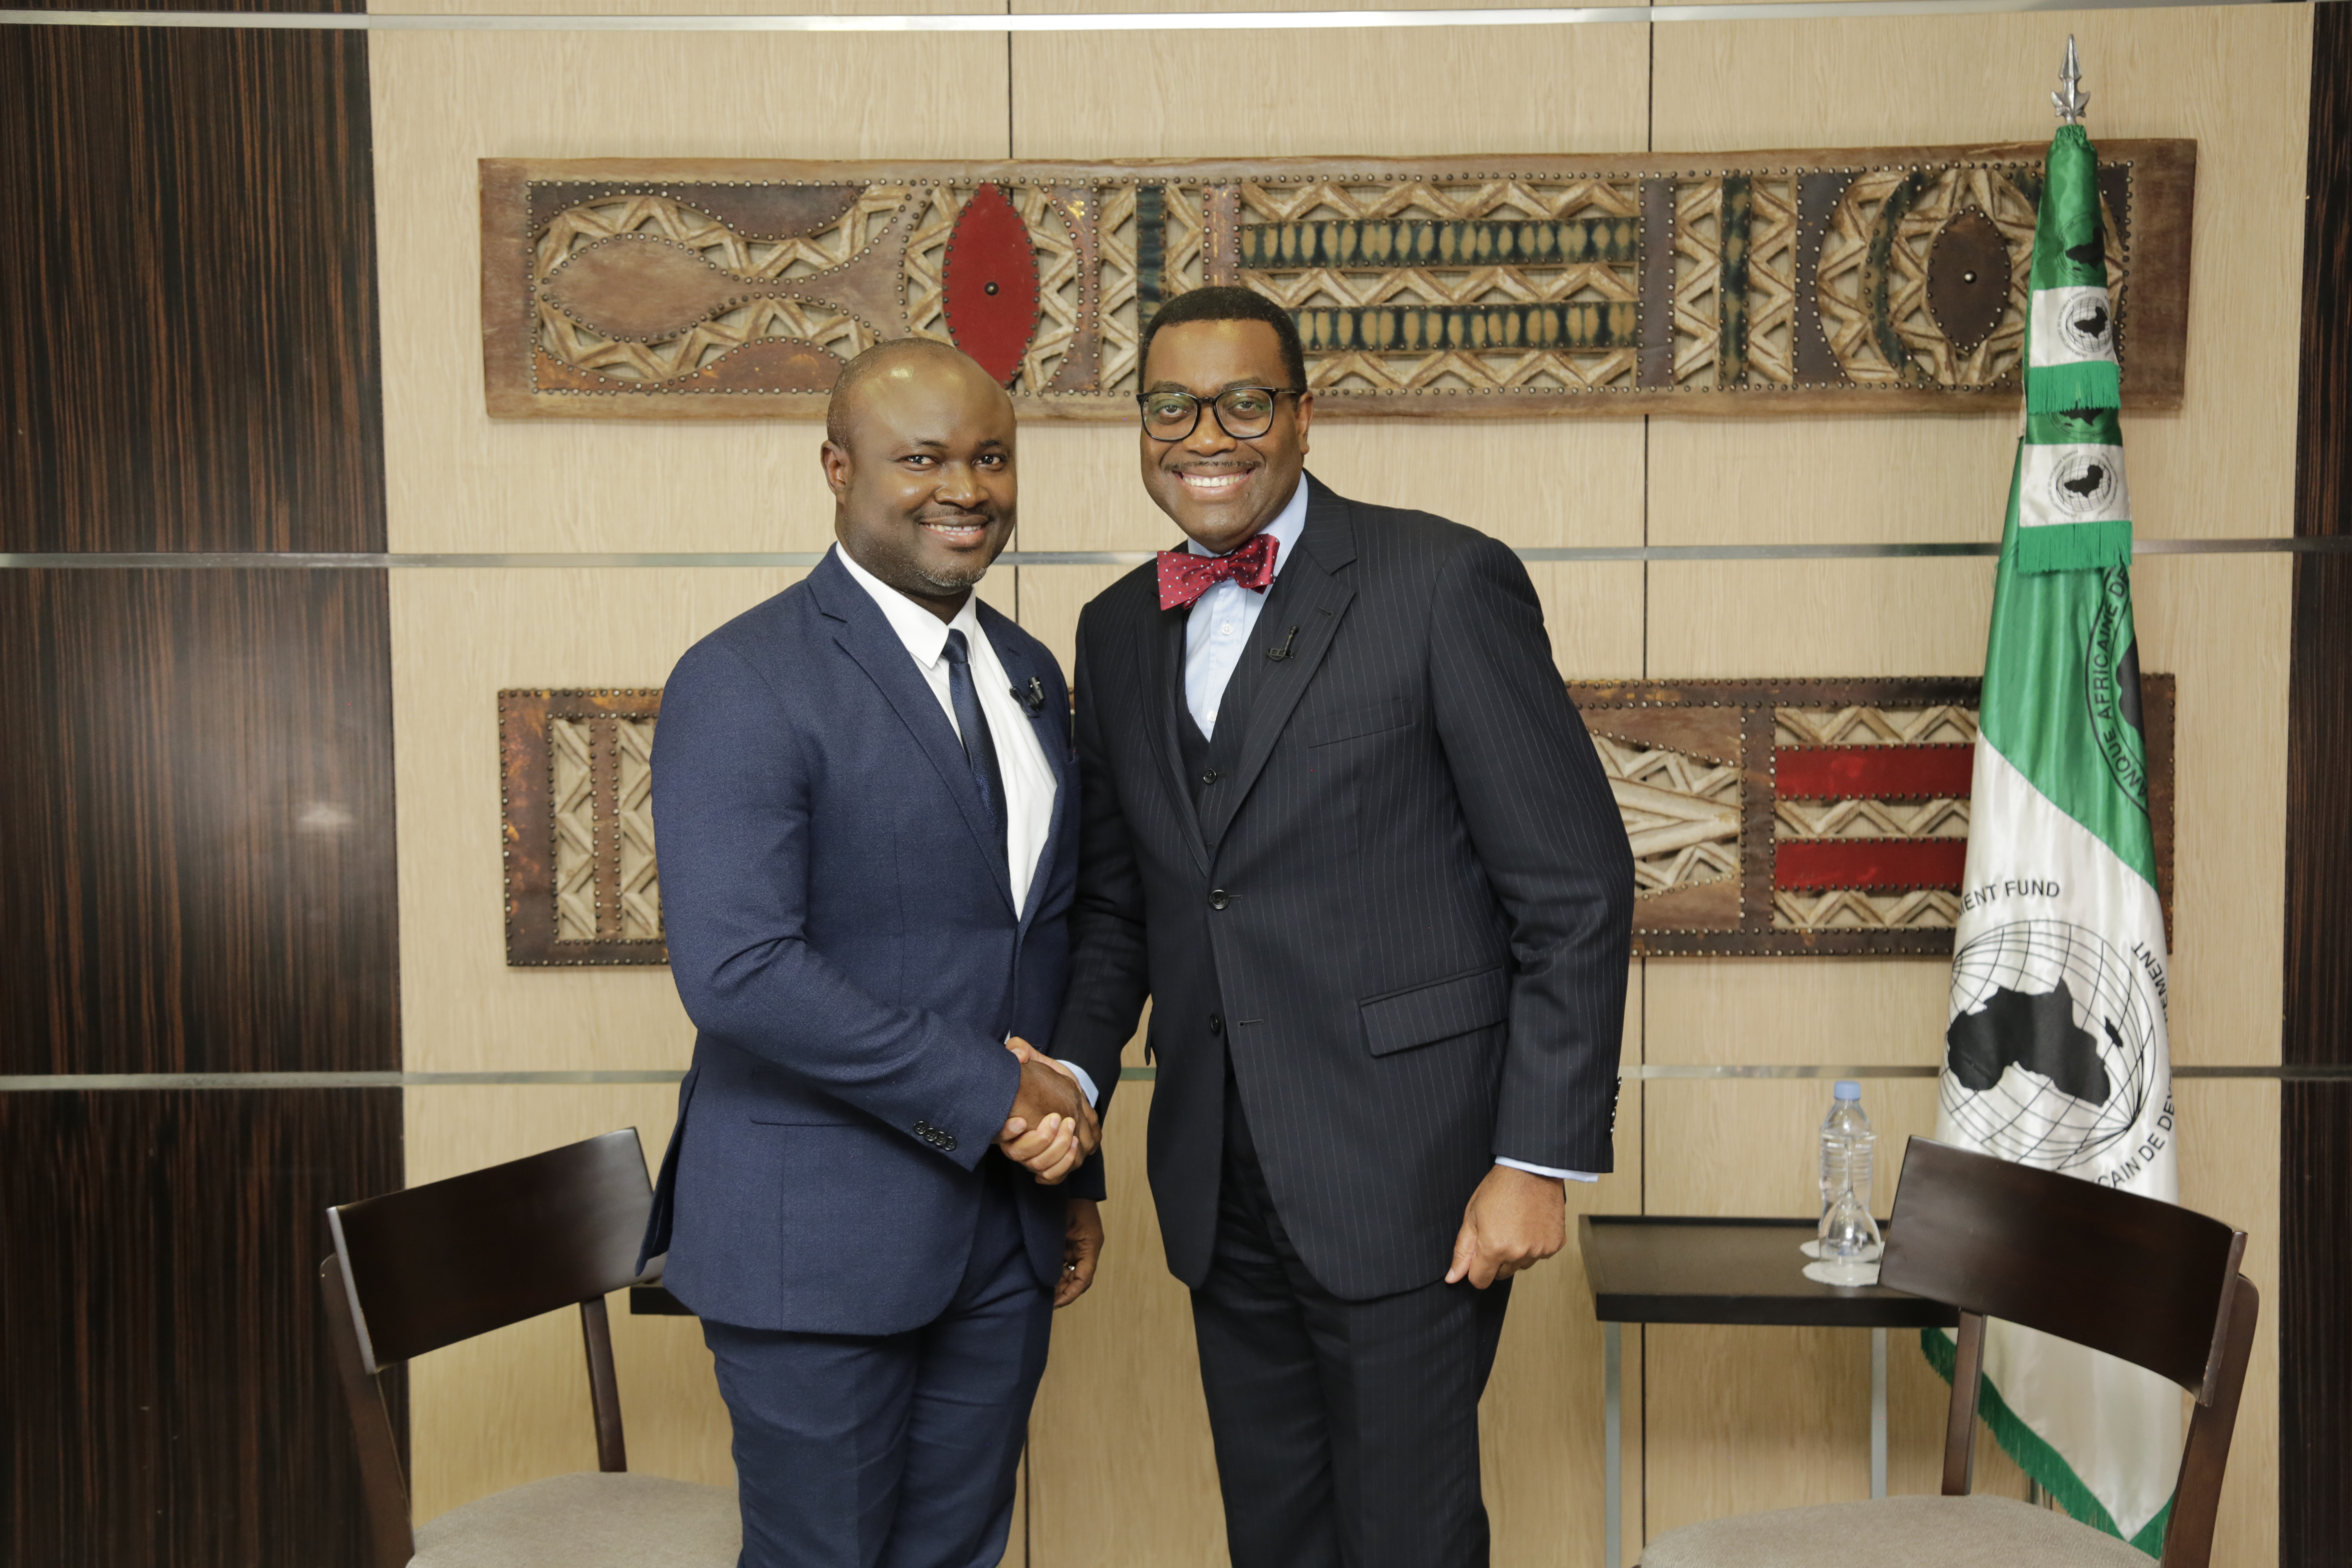 AFDB President and ALM African of the Year, Dr Akinwumi Adesina, Confirmed to deliver the Keynote Speech at the 8TH African Leadership Persons of the Year Gala – Johannesburg South Africa